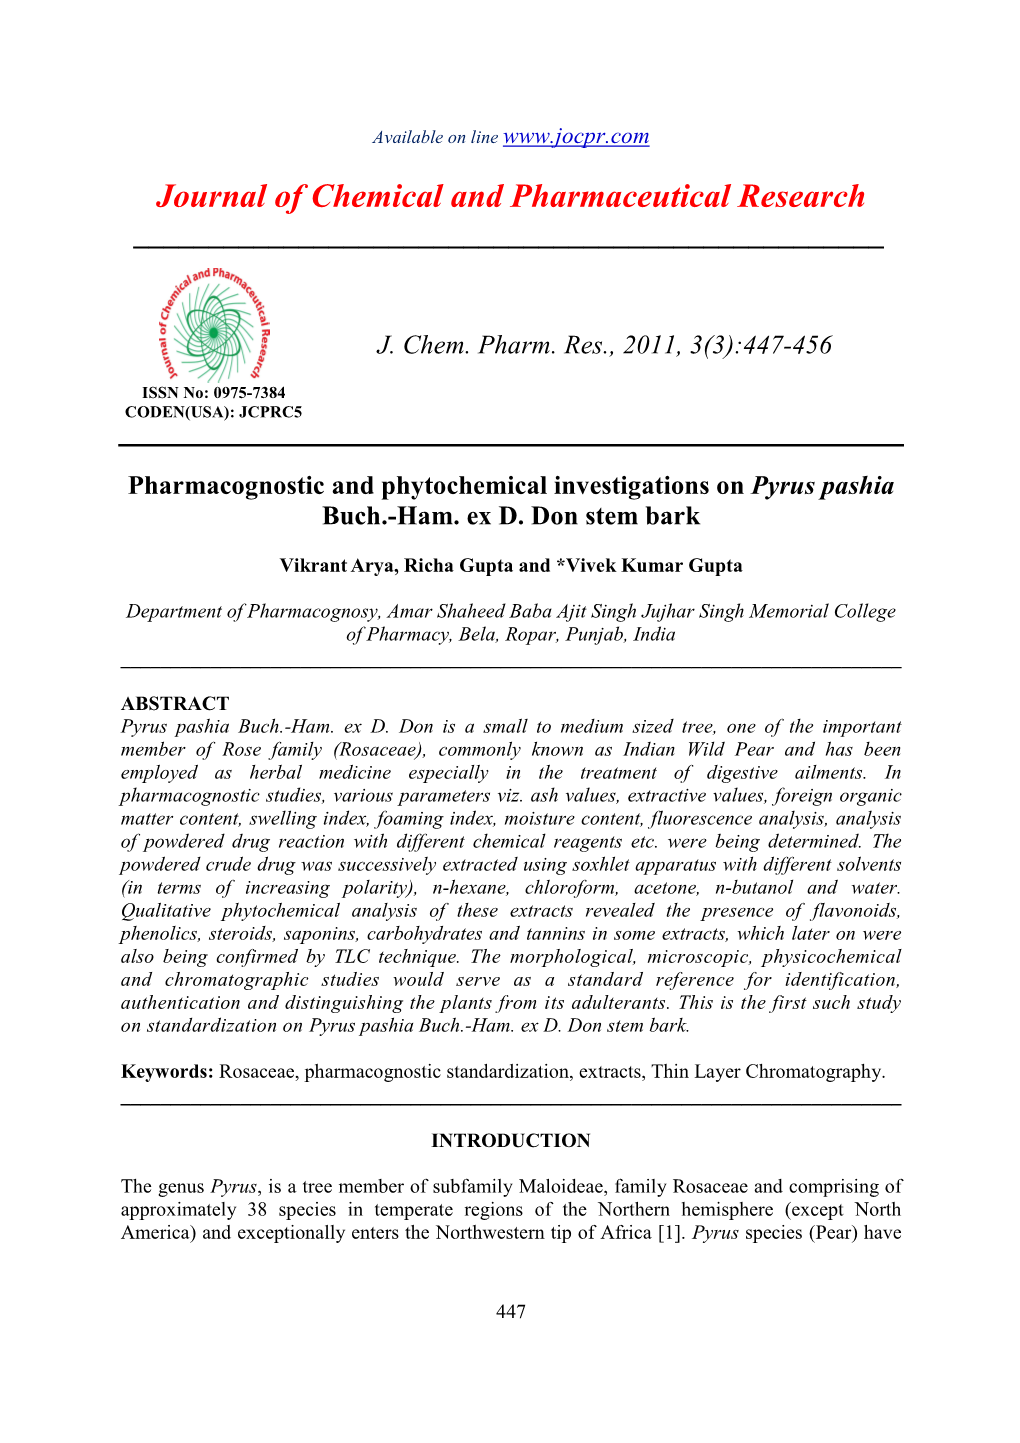 Pharmacognostic and Phytochemical Investigations on Pyrus Pashia Buch.-Ham